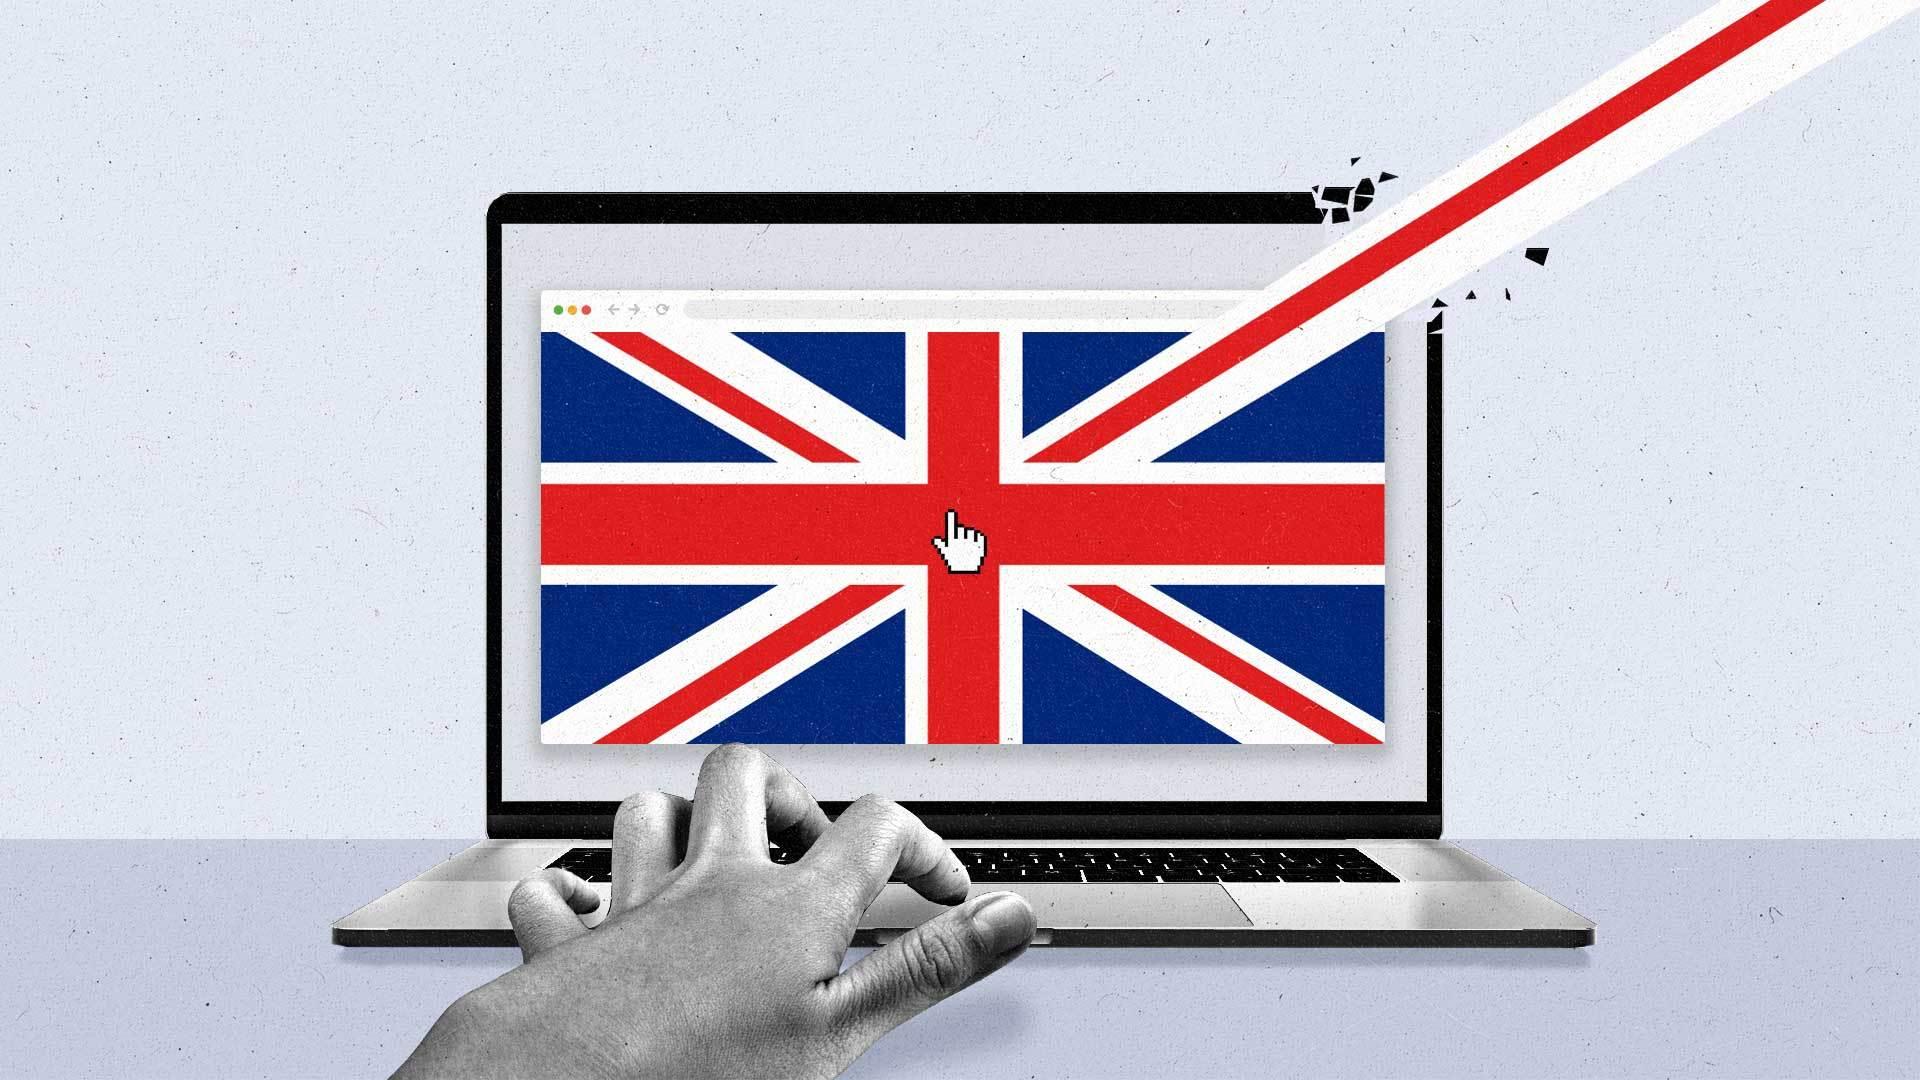 Using the touchpad on a laptop, a hand clicks a UK flag in a modal window, causing one of the diagonal bars to shoot upward like a line graph.